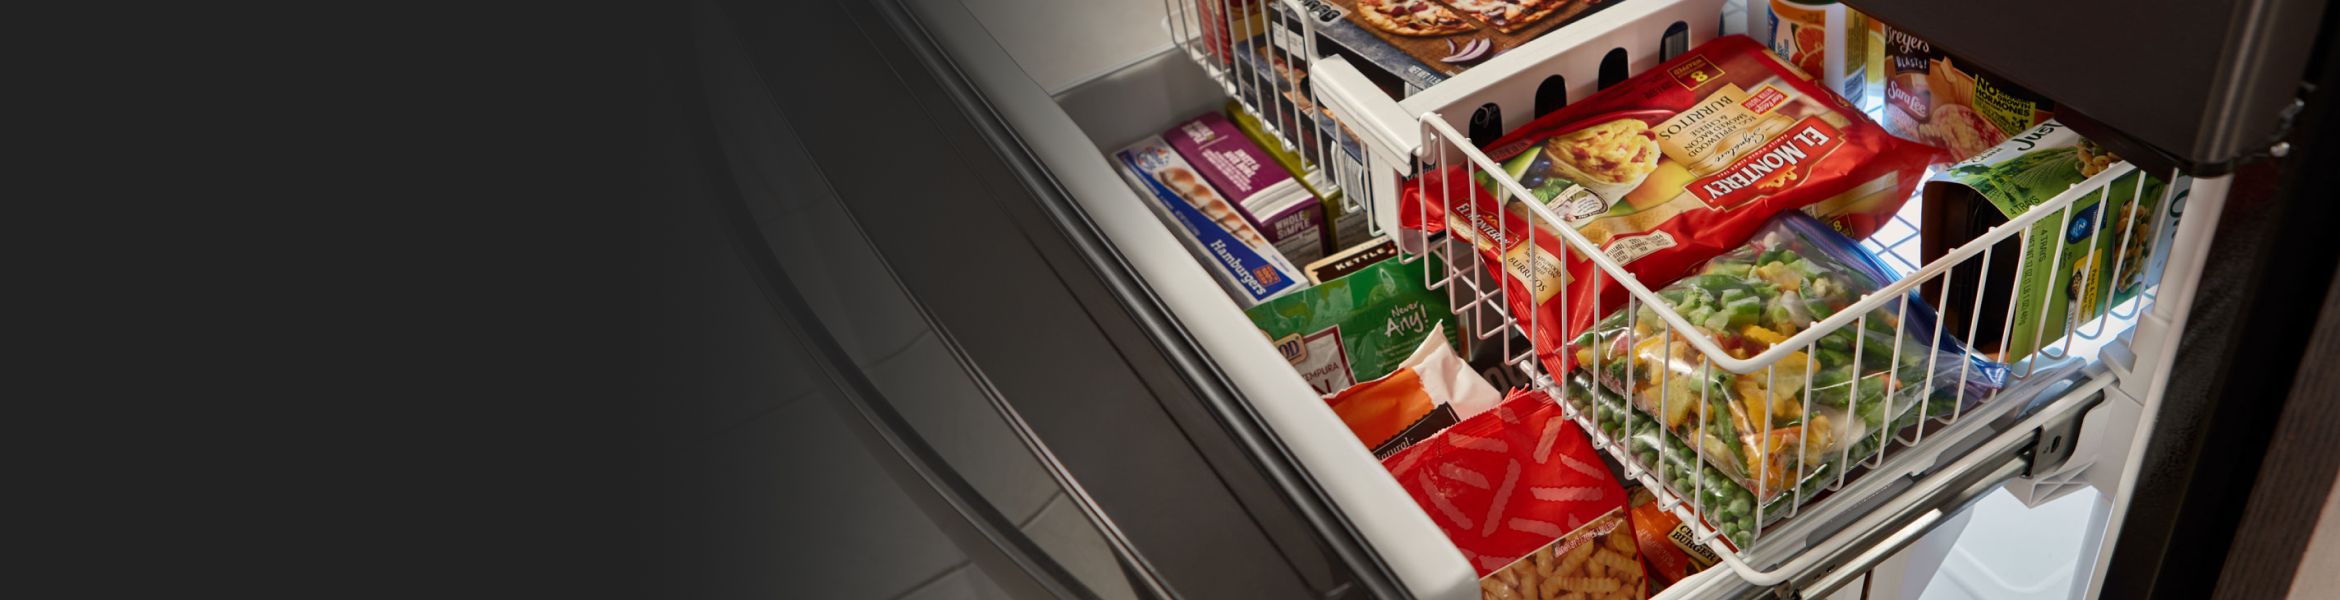 A multi-shelved freezer with food in it.